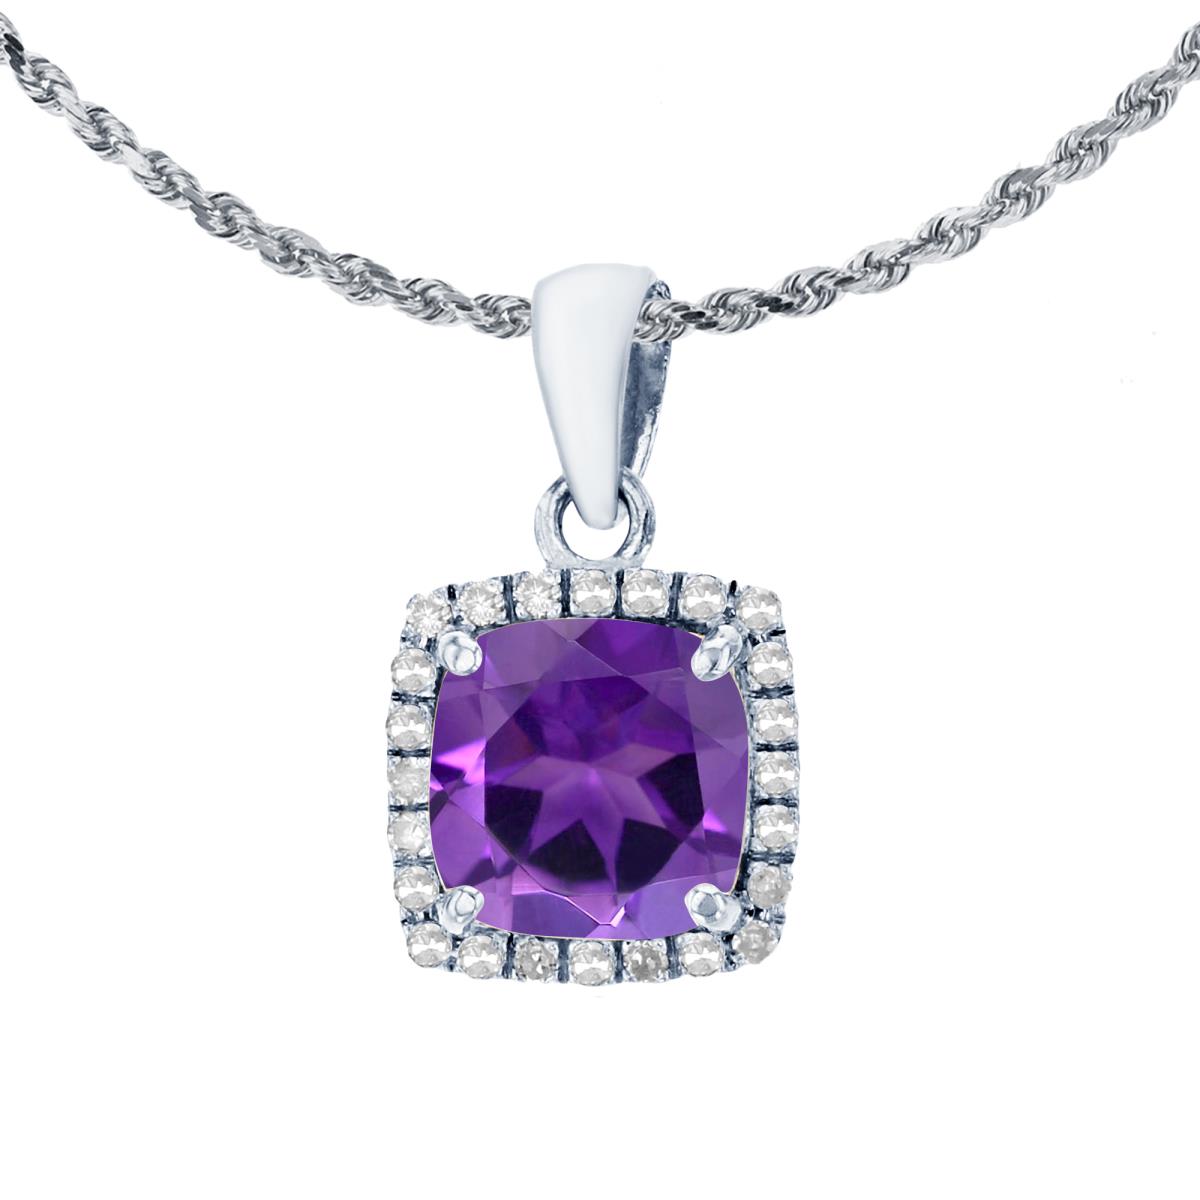 10K White Gold 7mm Cushion Amethyst & 0.12 CTTW Diamond Halo 18" Rope Chain Necklace